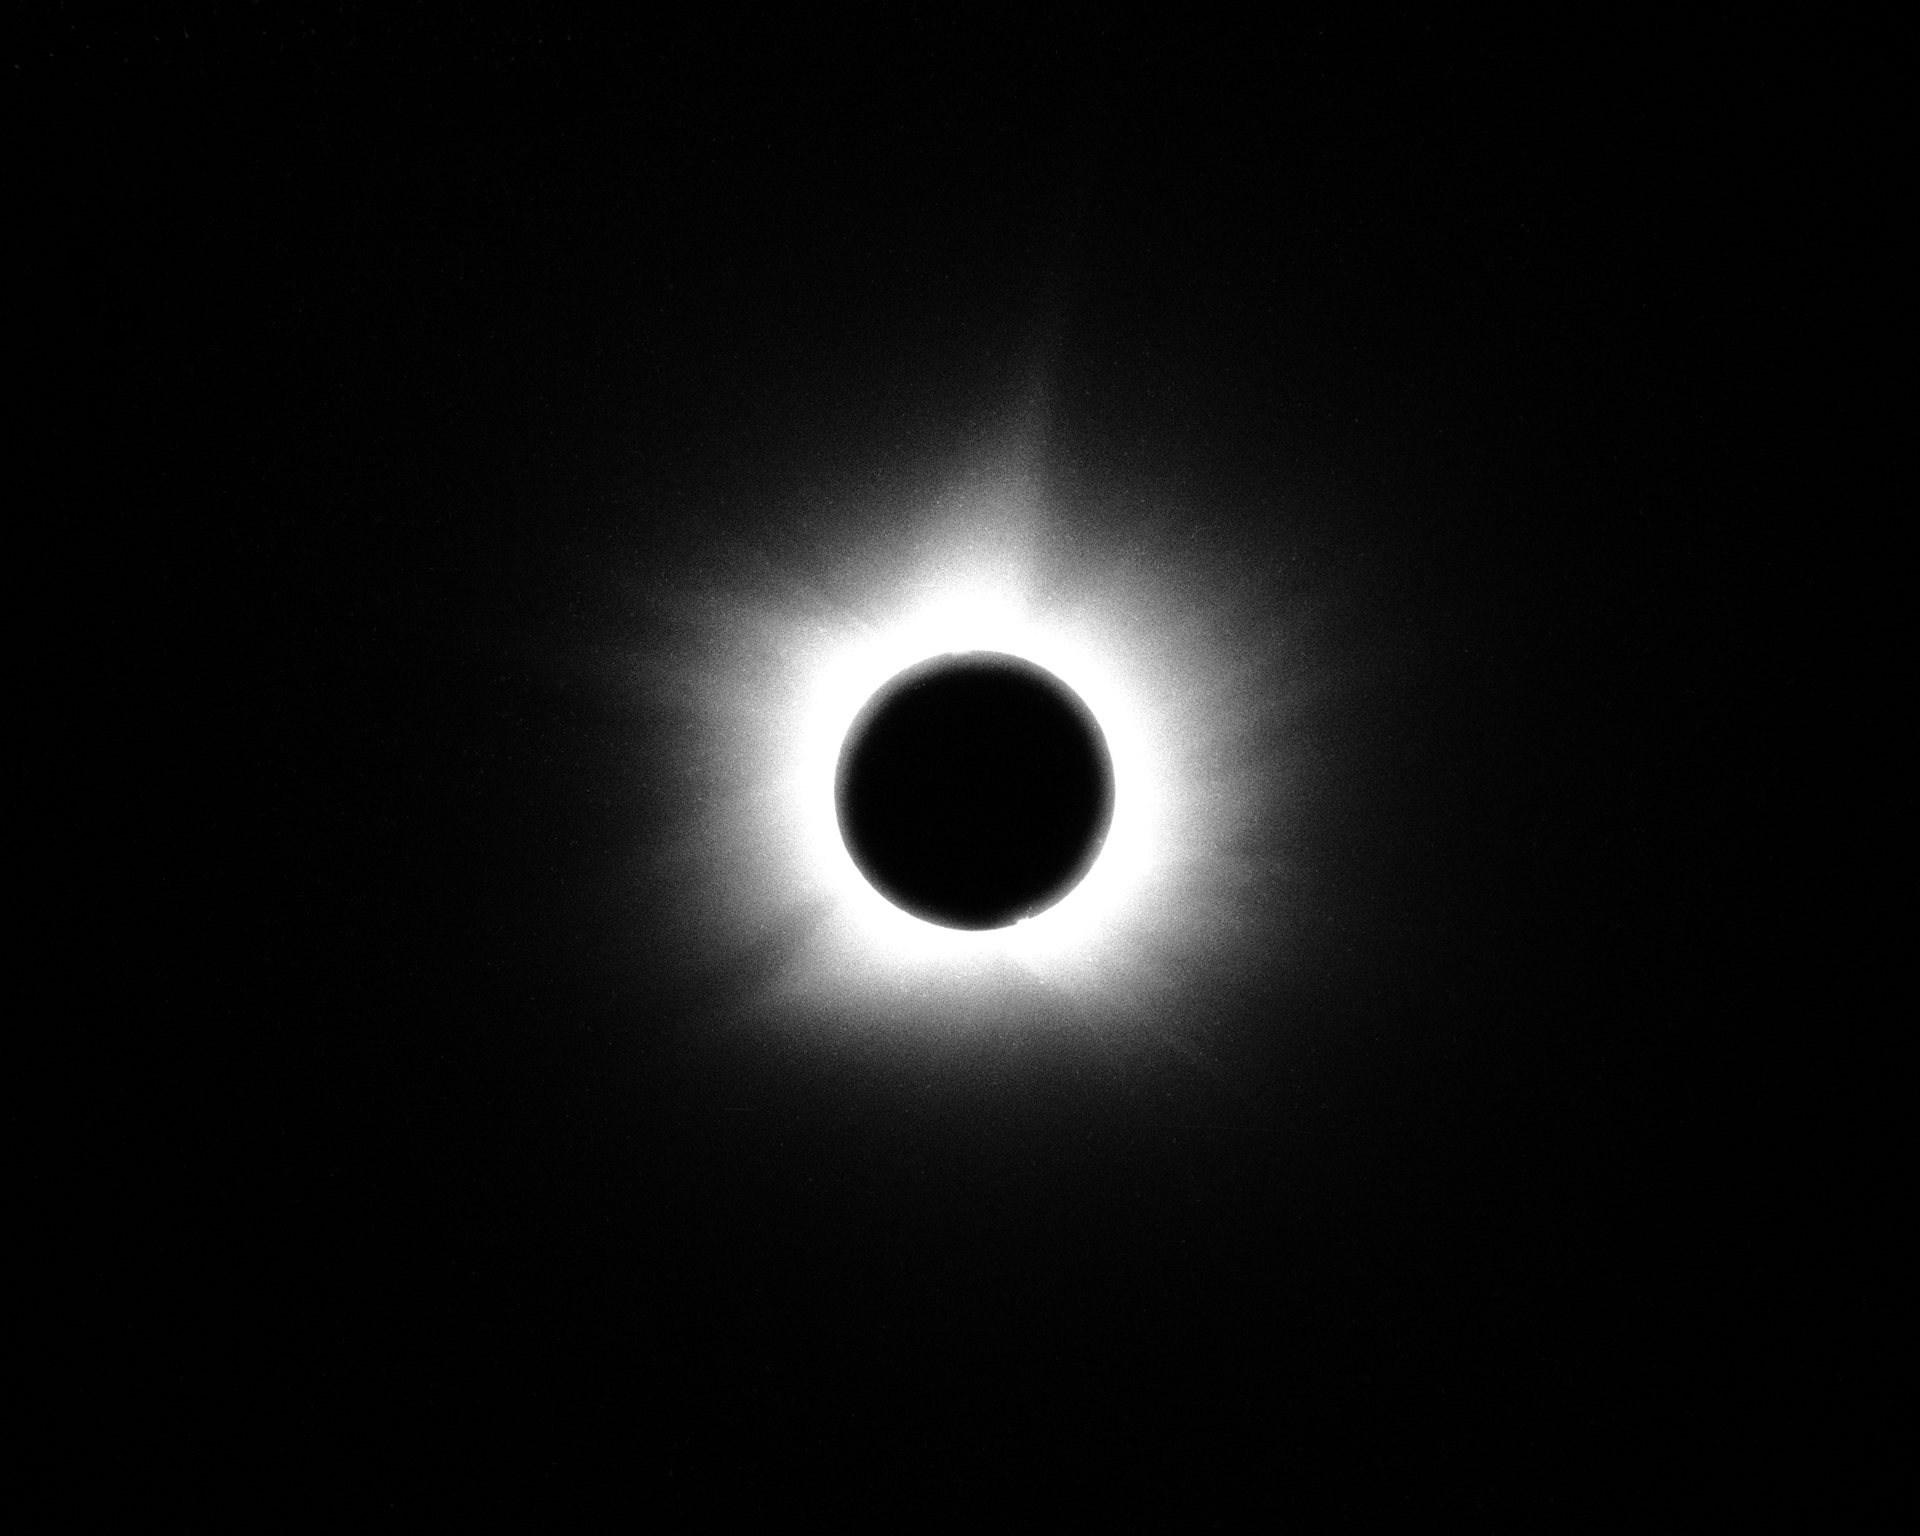 A total eclipse with the moon blocking the sun, creating a corona effect.